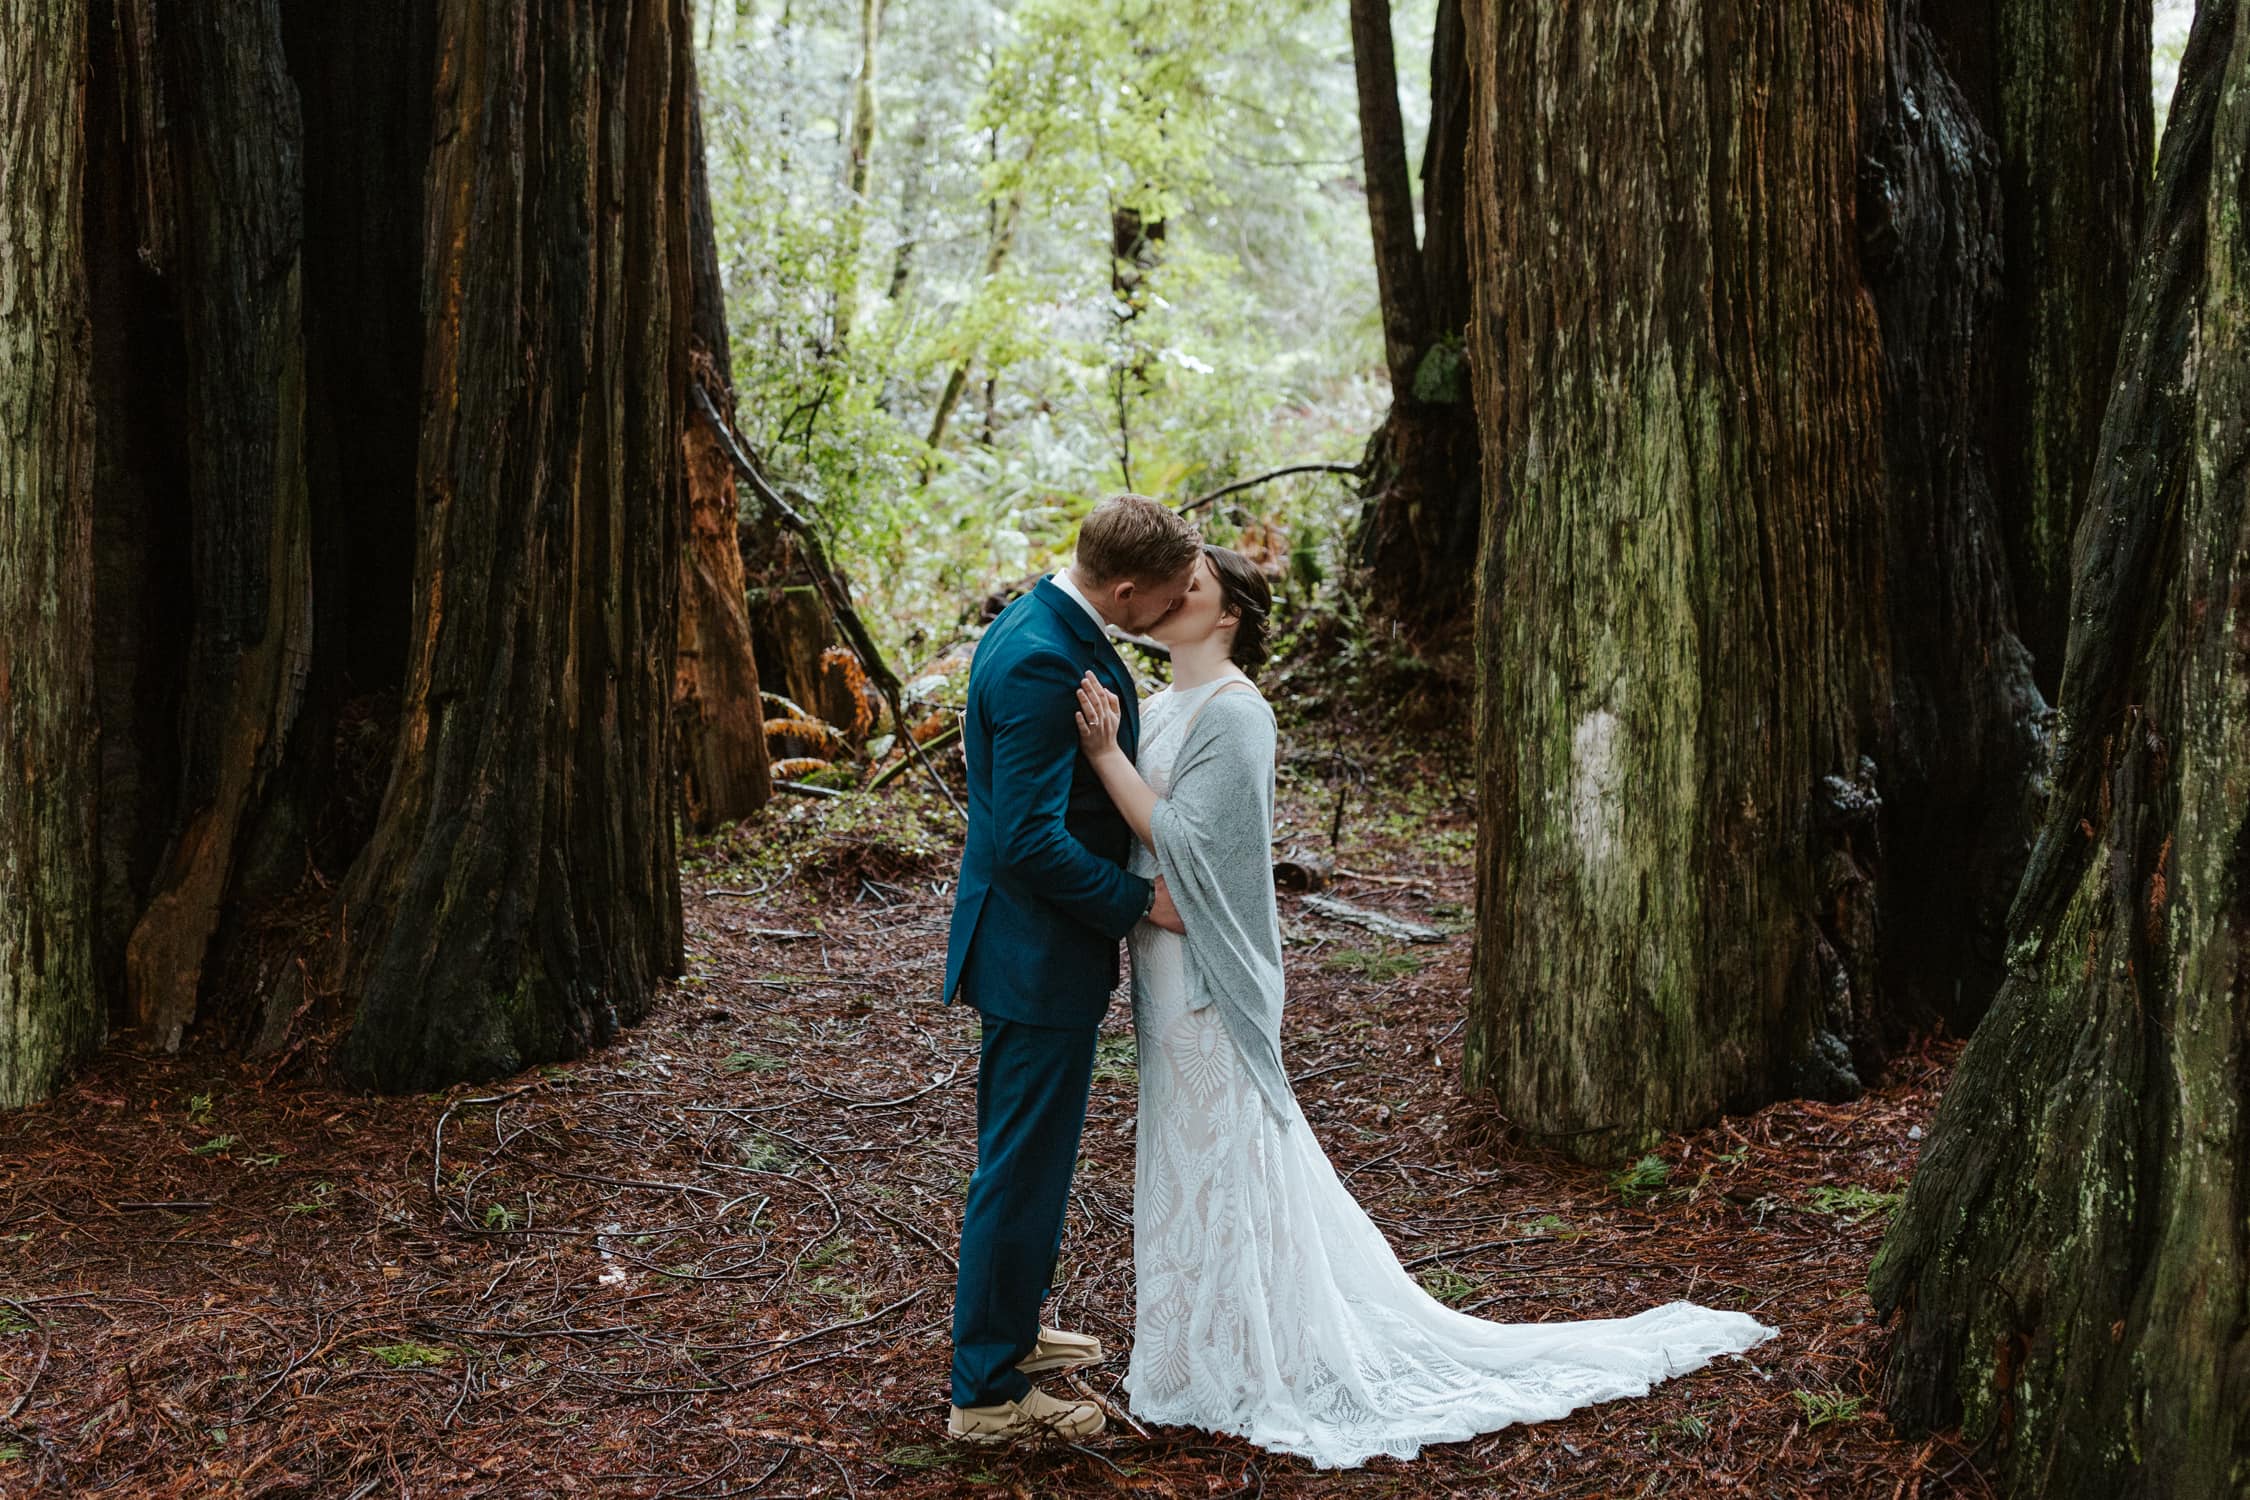 A bride and groom kissing in Templeman Grove in Redwood National Park.